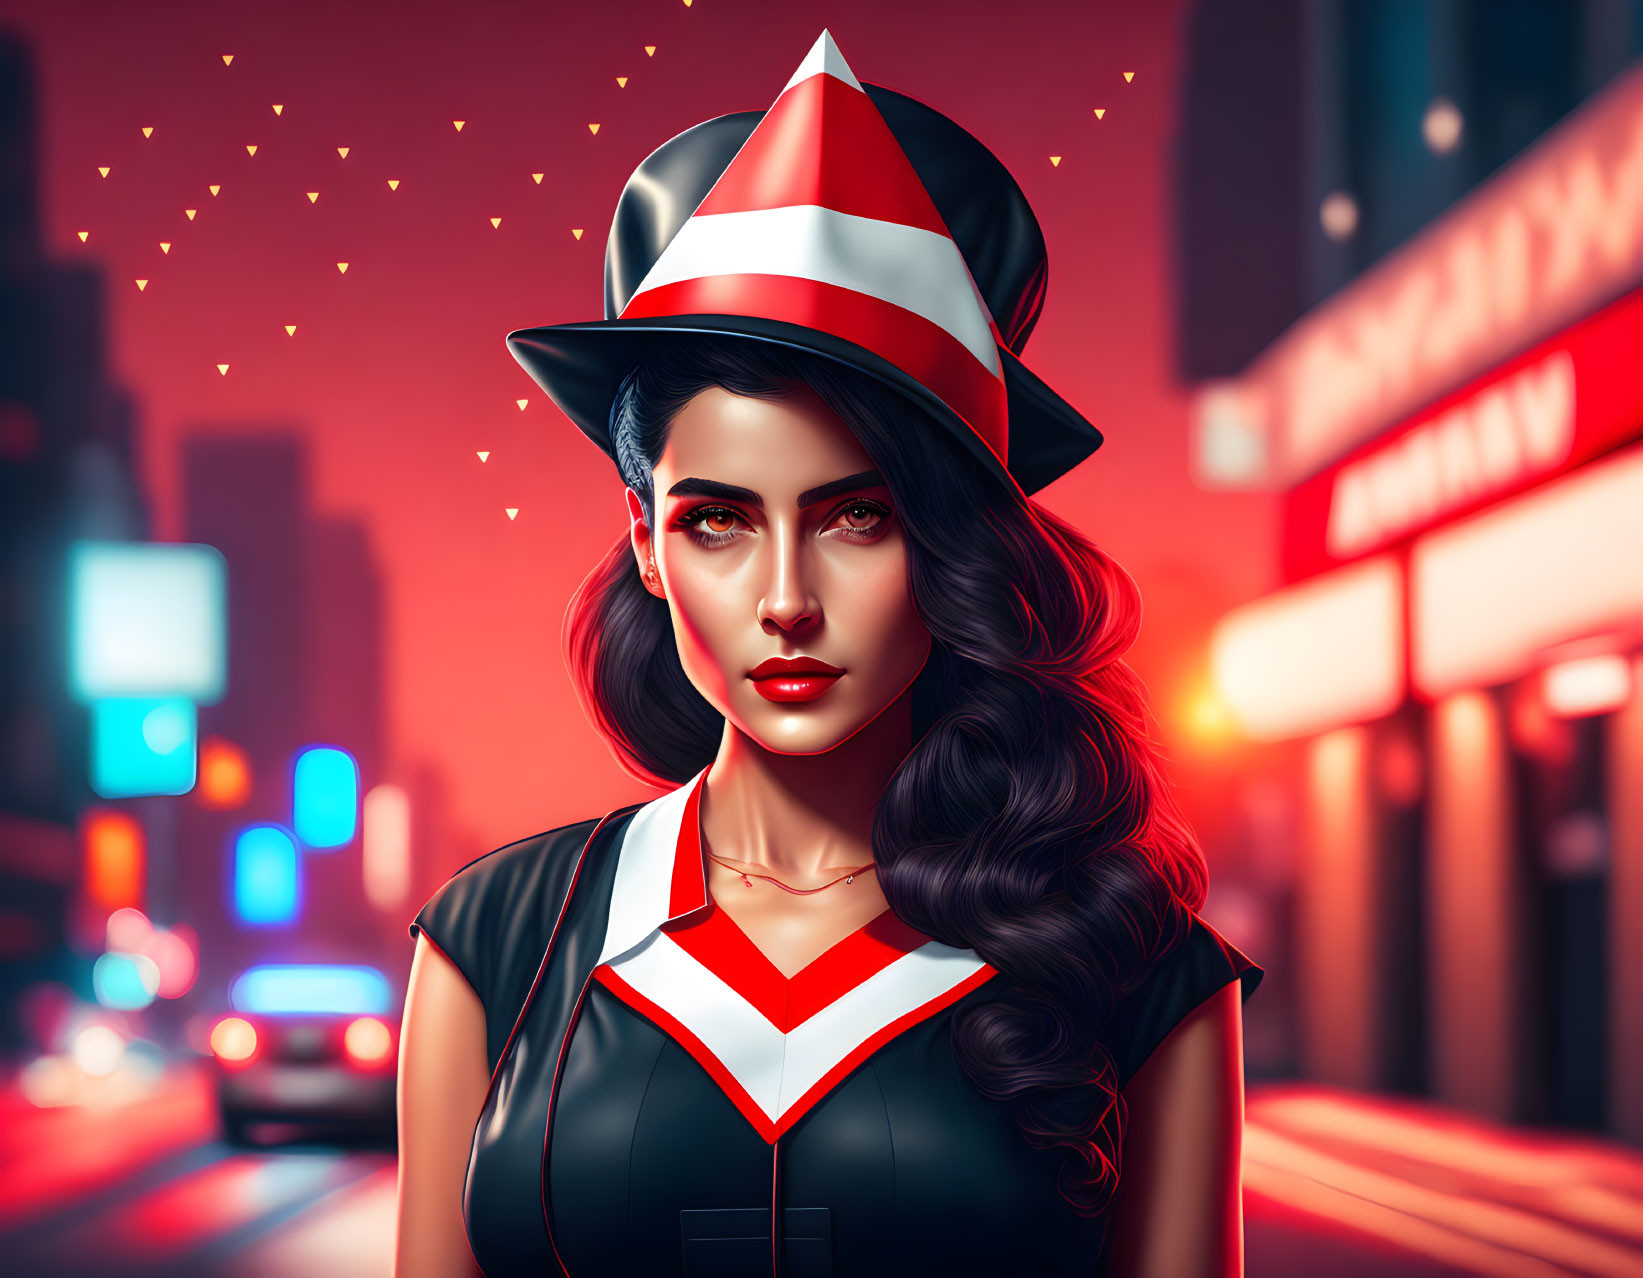 Dark-haired woman in striped hat with red lipstick against neon city backdrop